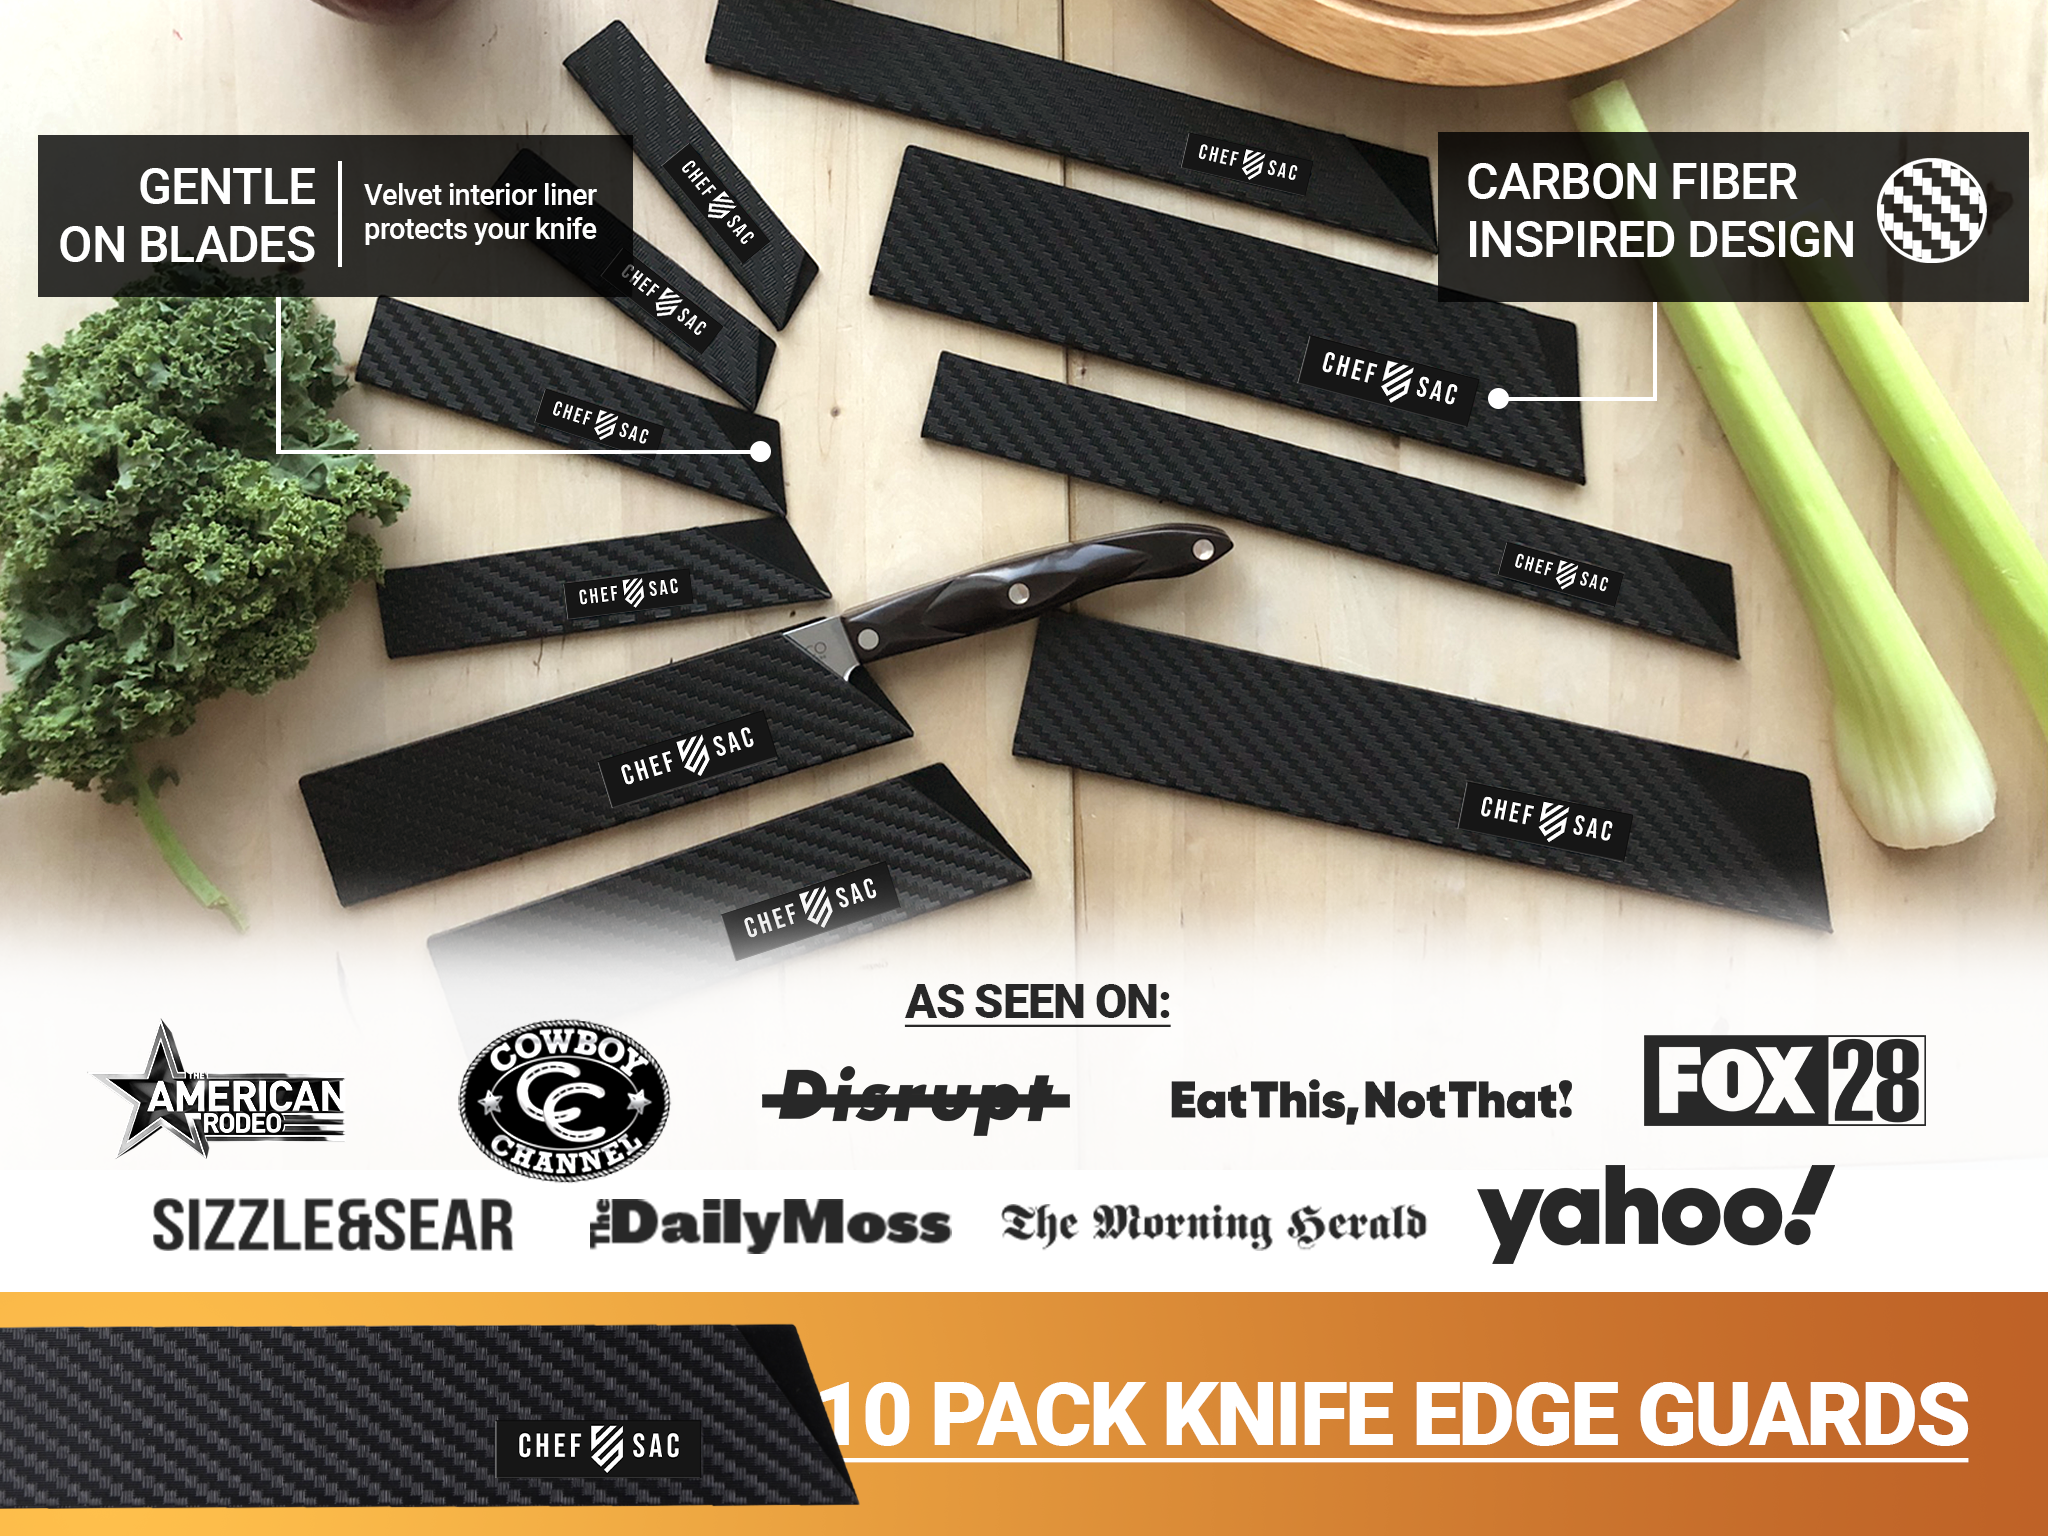 KnifeSafe Cutlery Knife Blade Protective Cover Safely Store Transport Knives 10 inch Gray, Men's